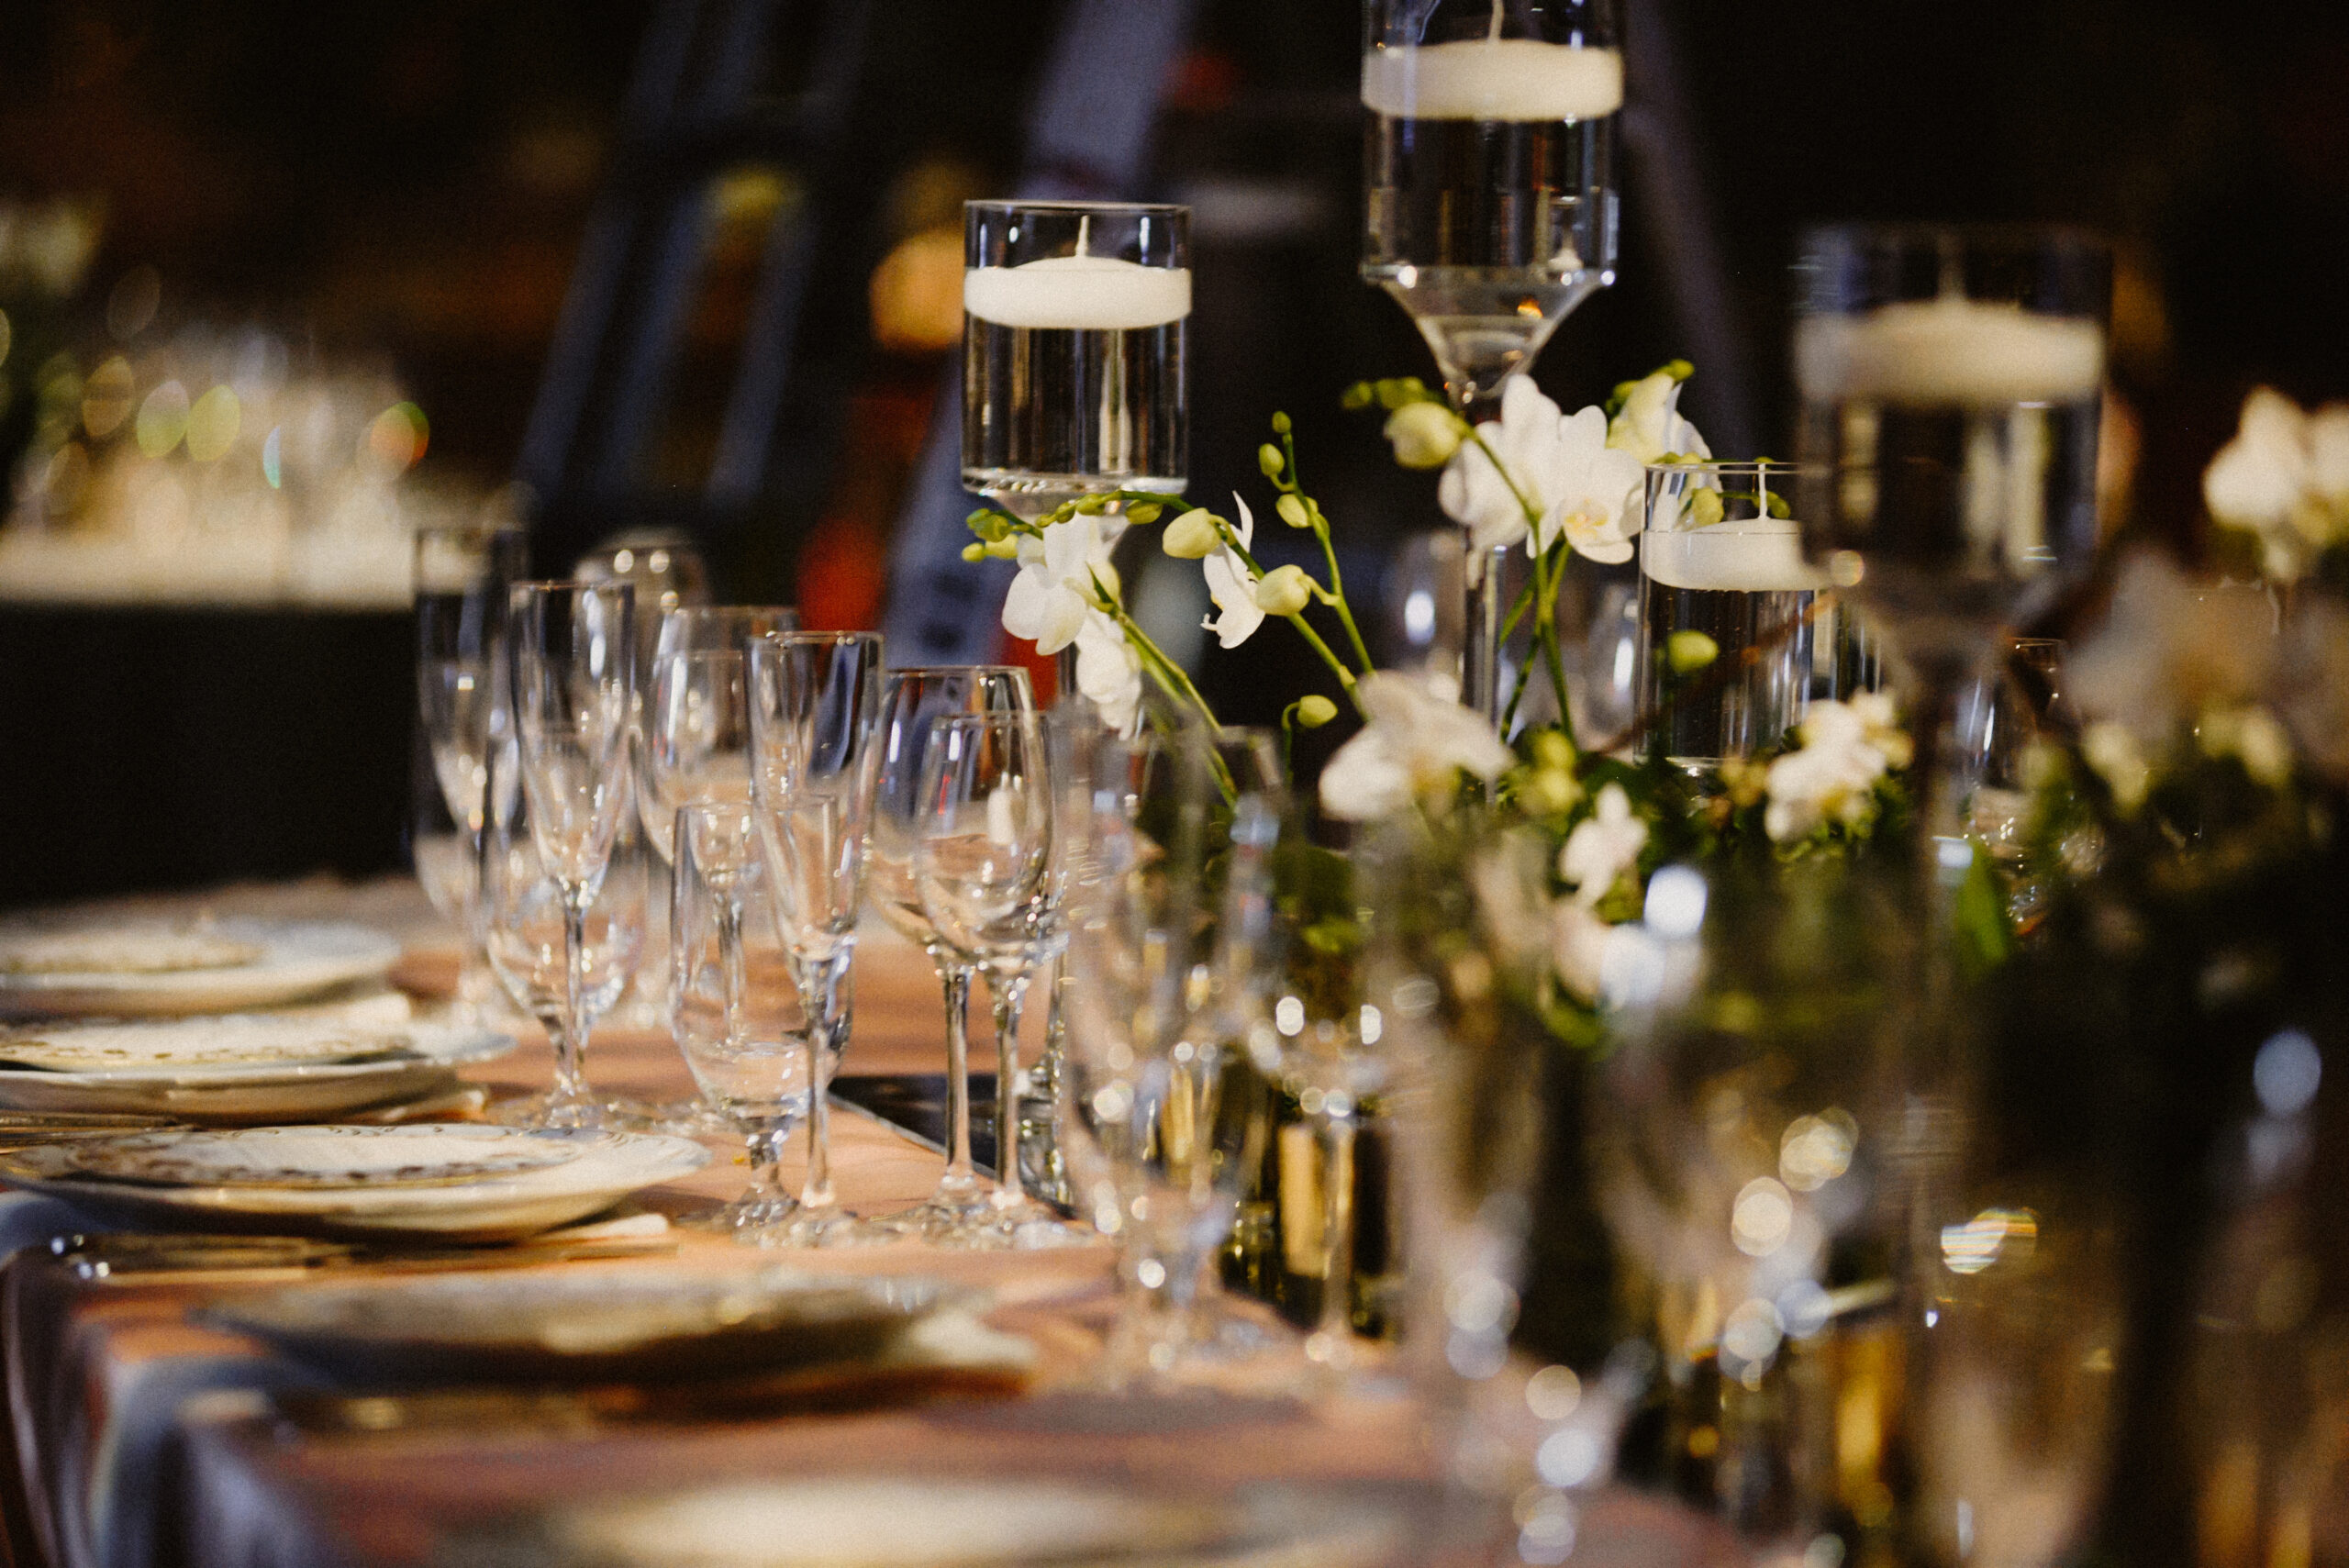 Table setting with focus on goblets and plates